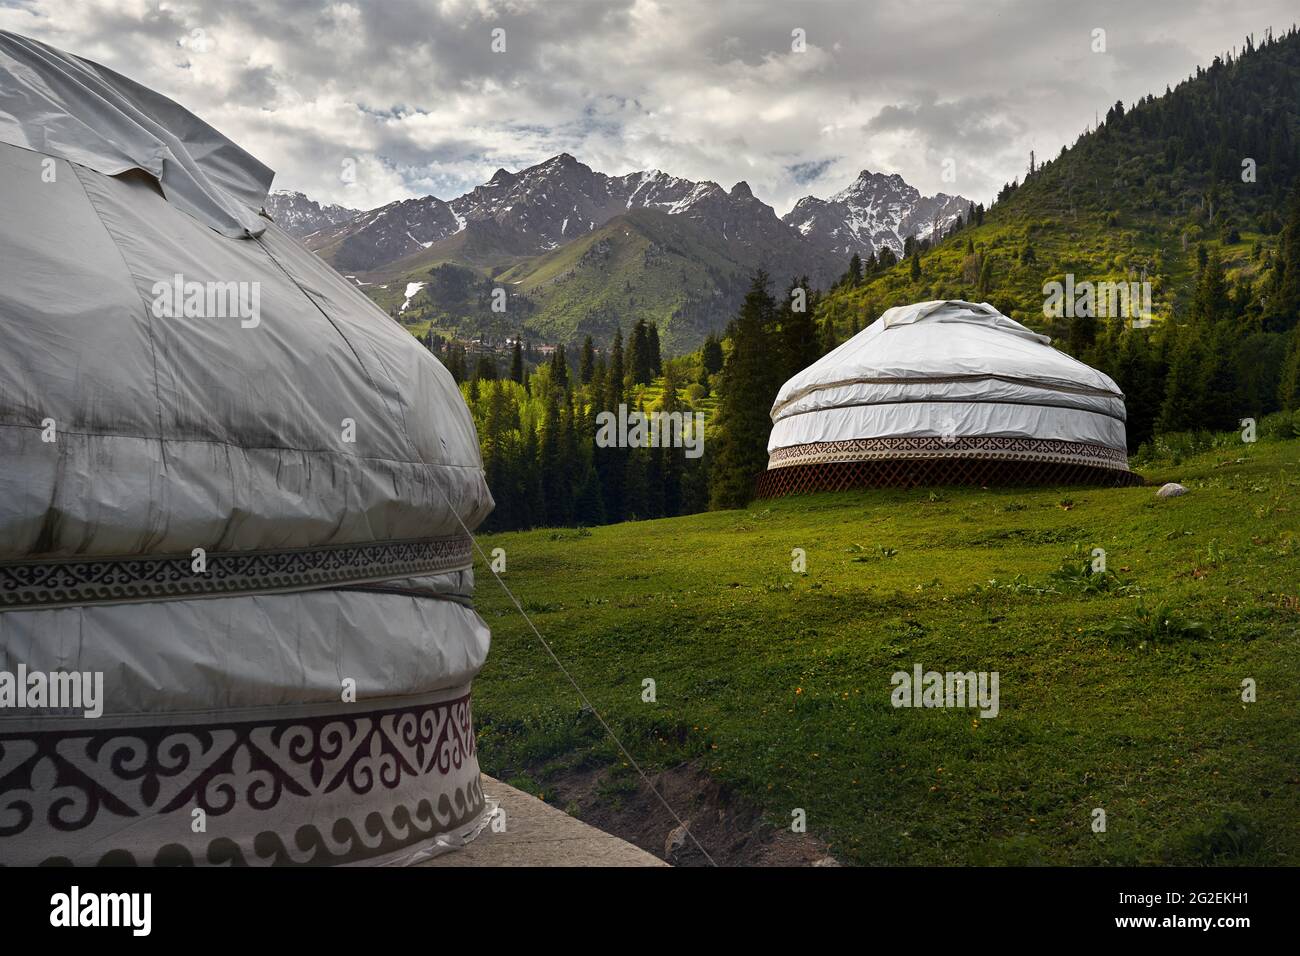 Guest house complex of white Yurt nomadic house at green mountain valley in Almaty, Kazakhstan Stock Photo